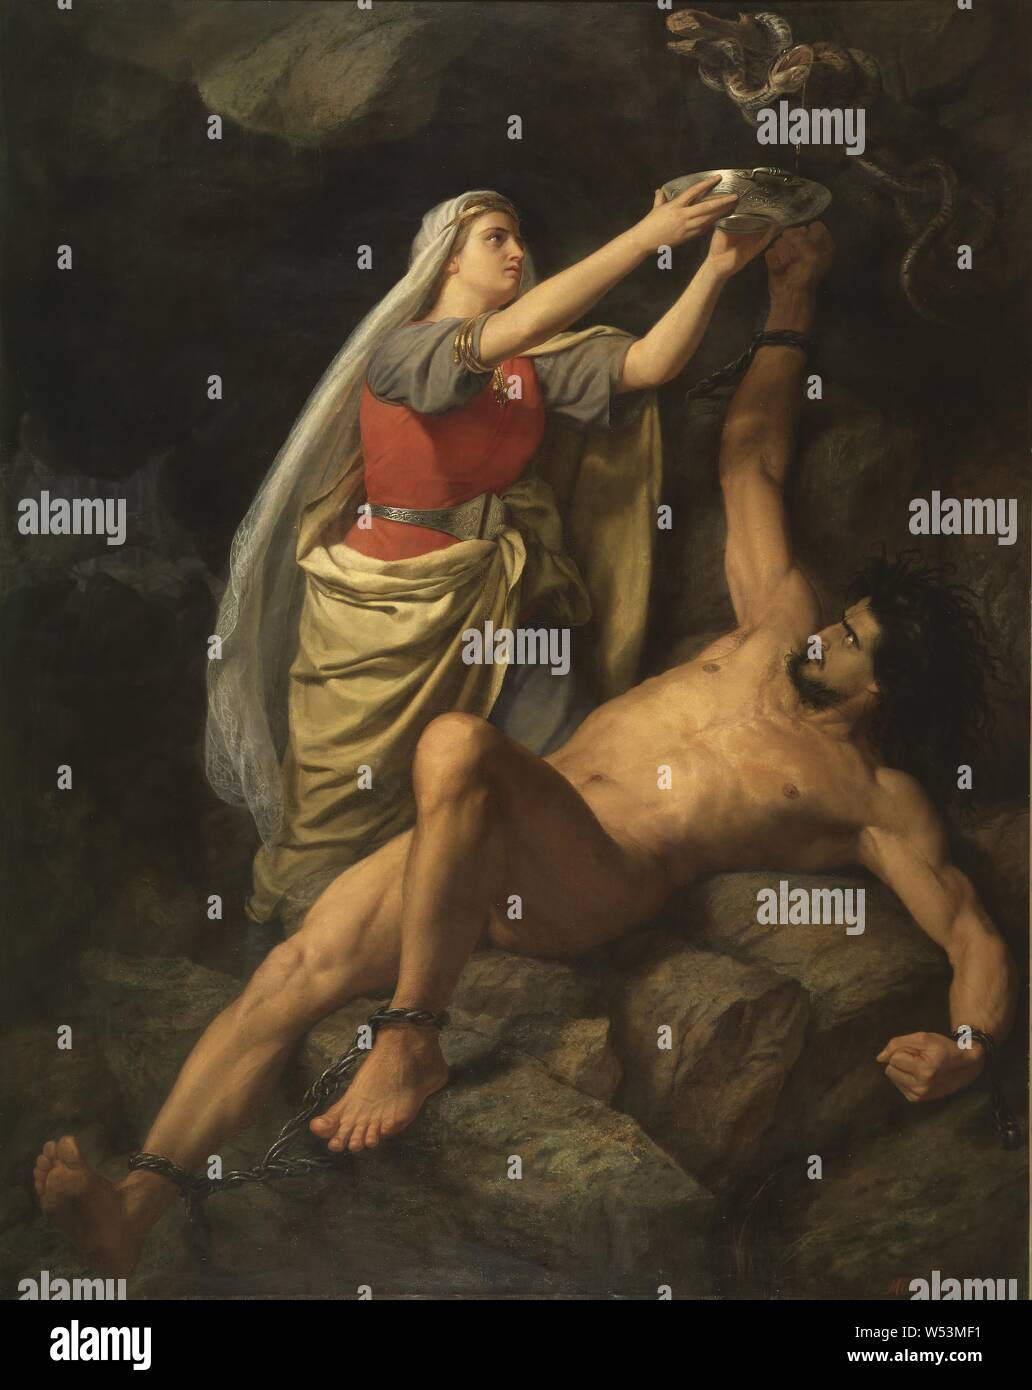 Mårten Eskil Winge, Loki and Sigyn, painting, 1863, oil on canvas, Height, 348 cm (11.4 ft), Width, 275 cm (108.2 inches), Signed, ME, Winge Roma 1863. Stock Photo